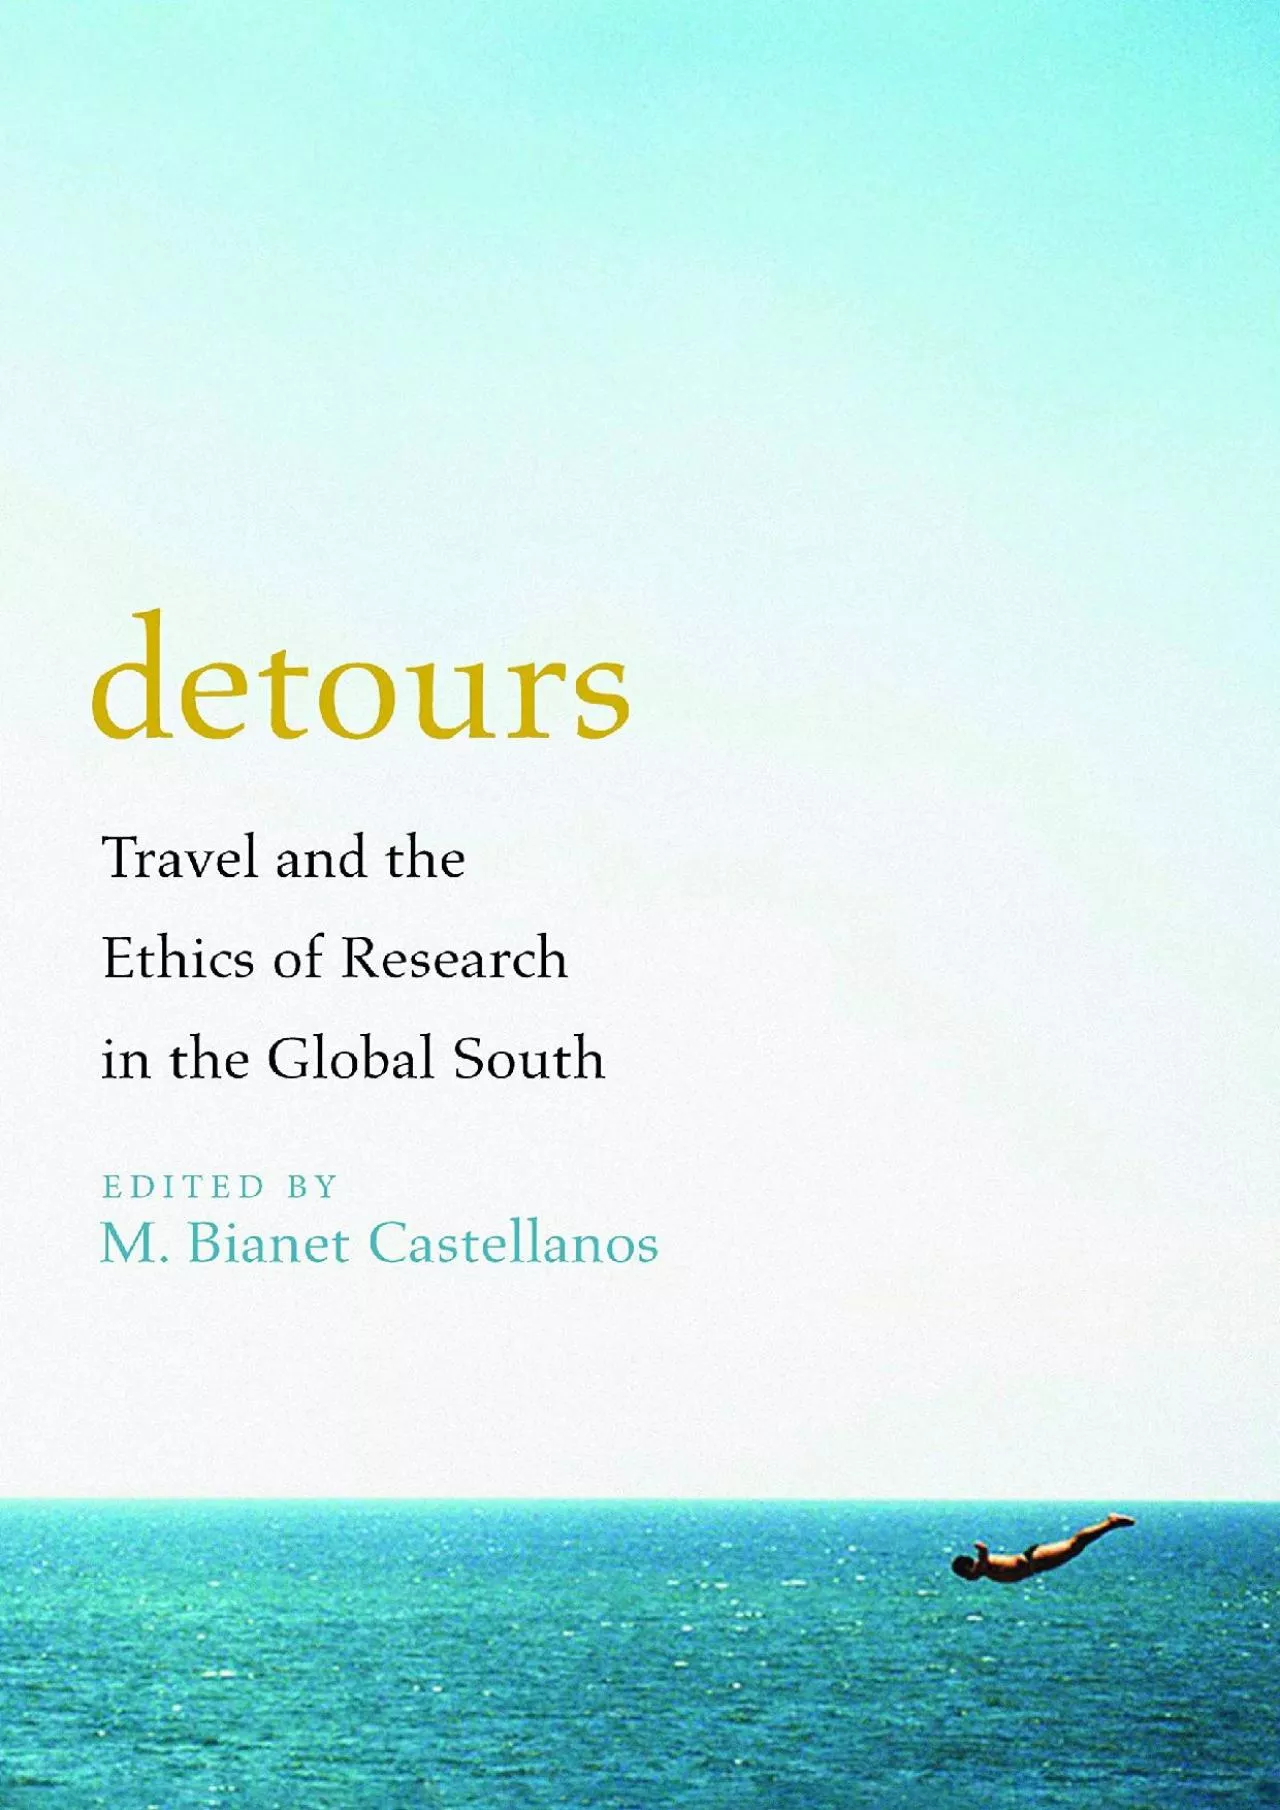 (DOWNLOAD)-Detours: Travel and the Ethics of Research in the Global South